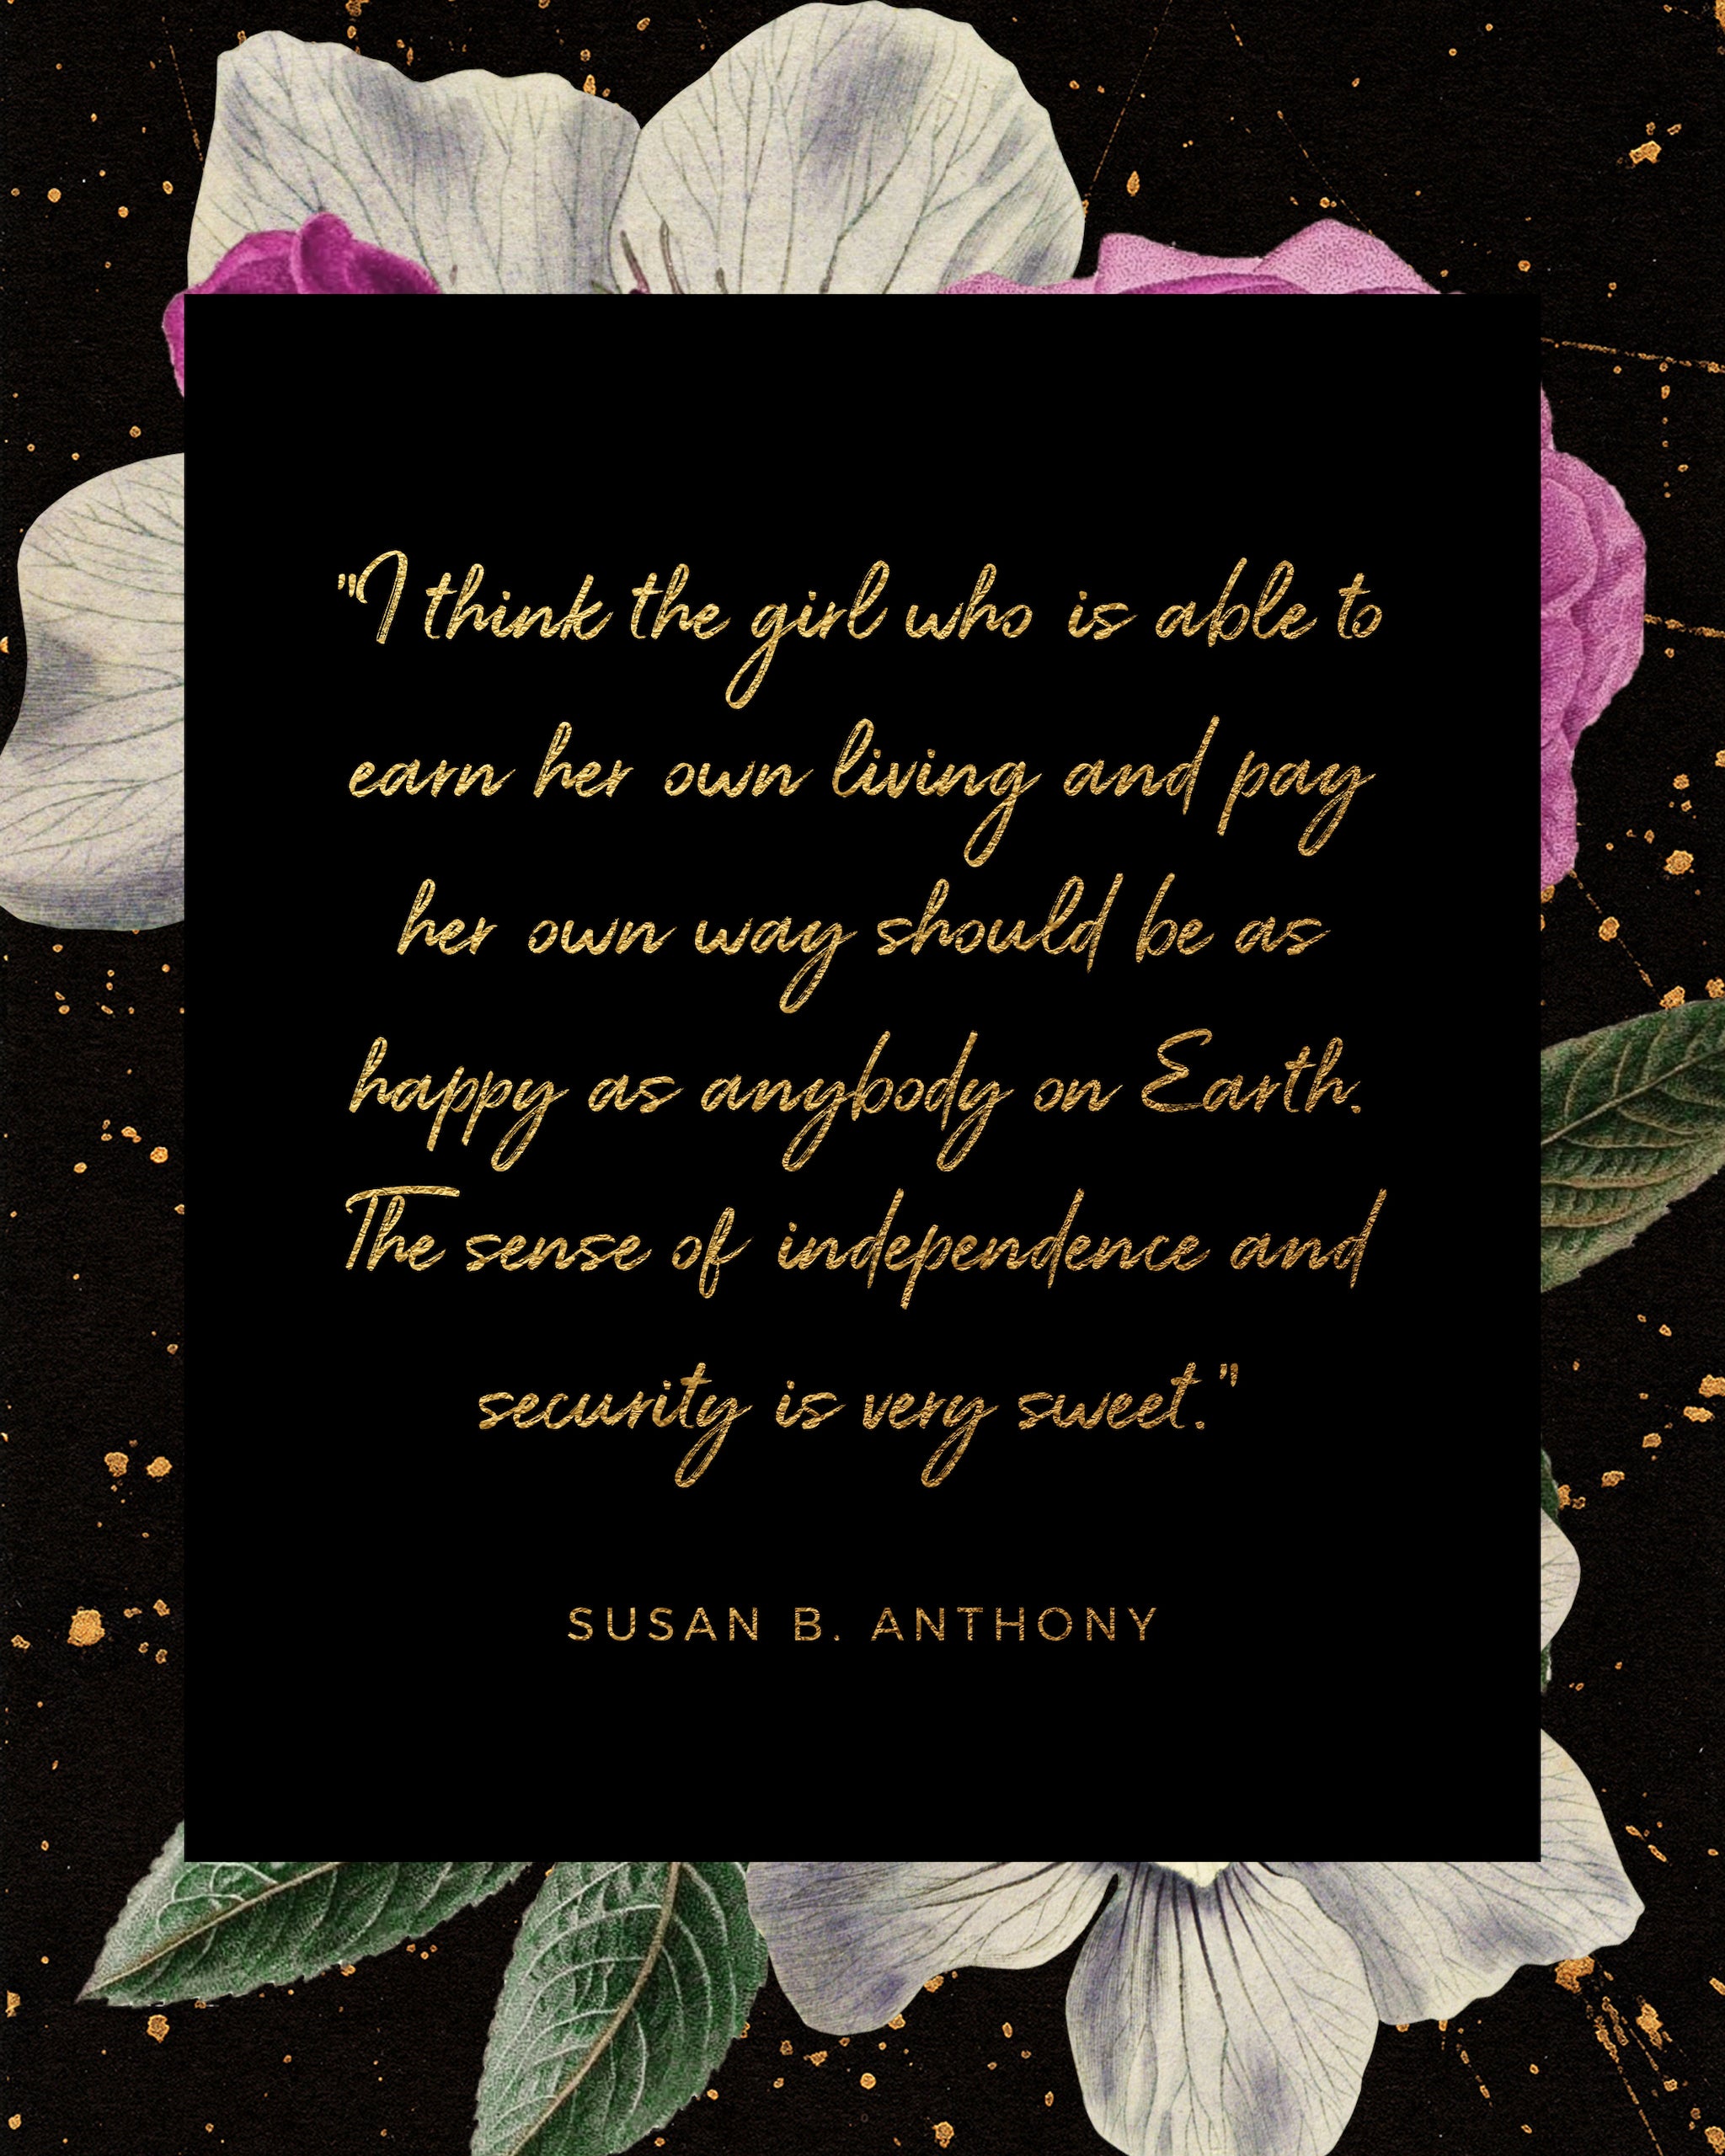 Quote: I think the girl who is able to earn her own living and pay her own way should be as happy as anybody on Earth. The sense of independence and security is very sweet. Susan B. Anthony